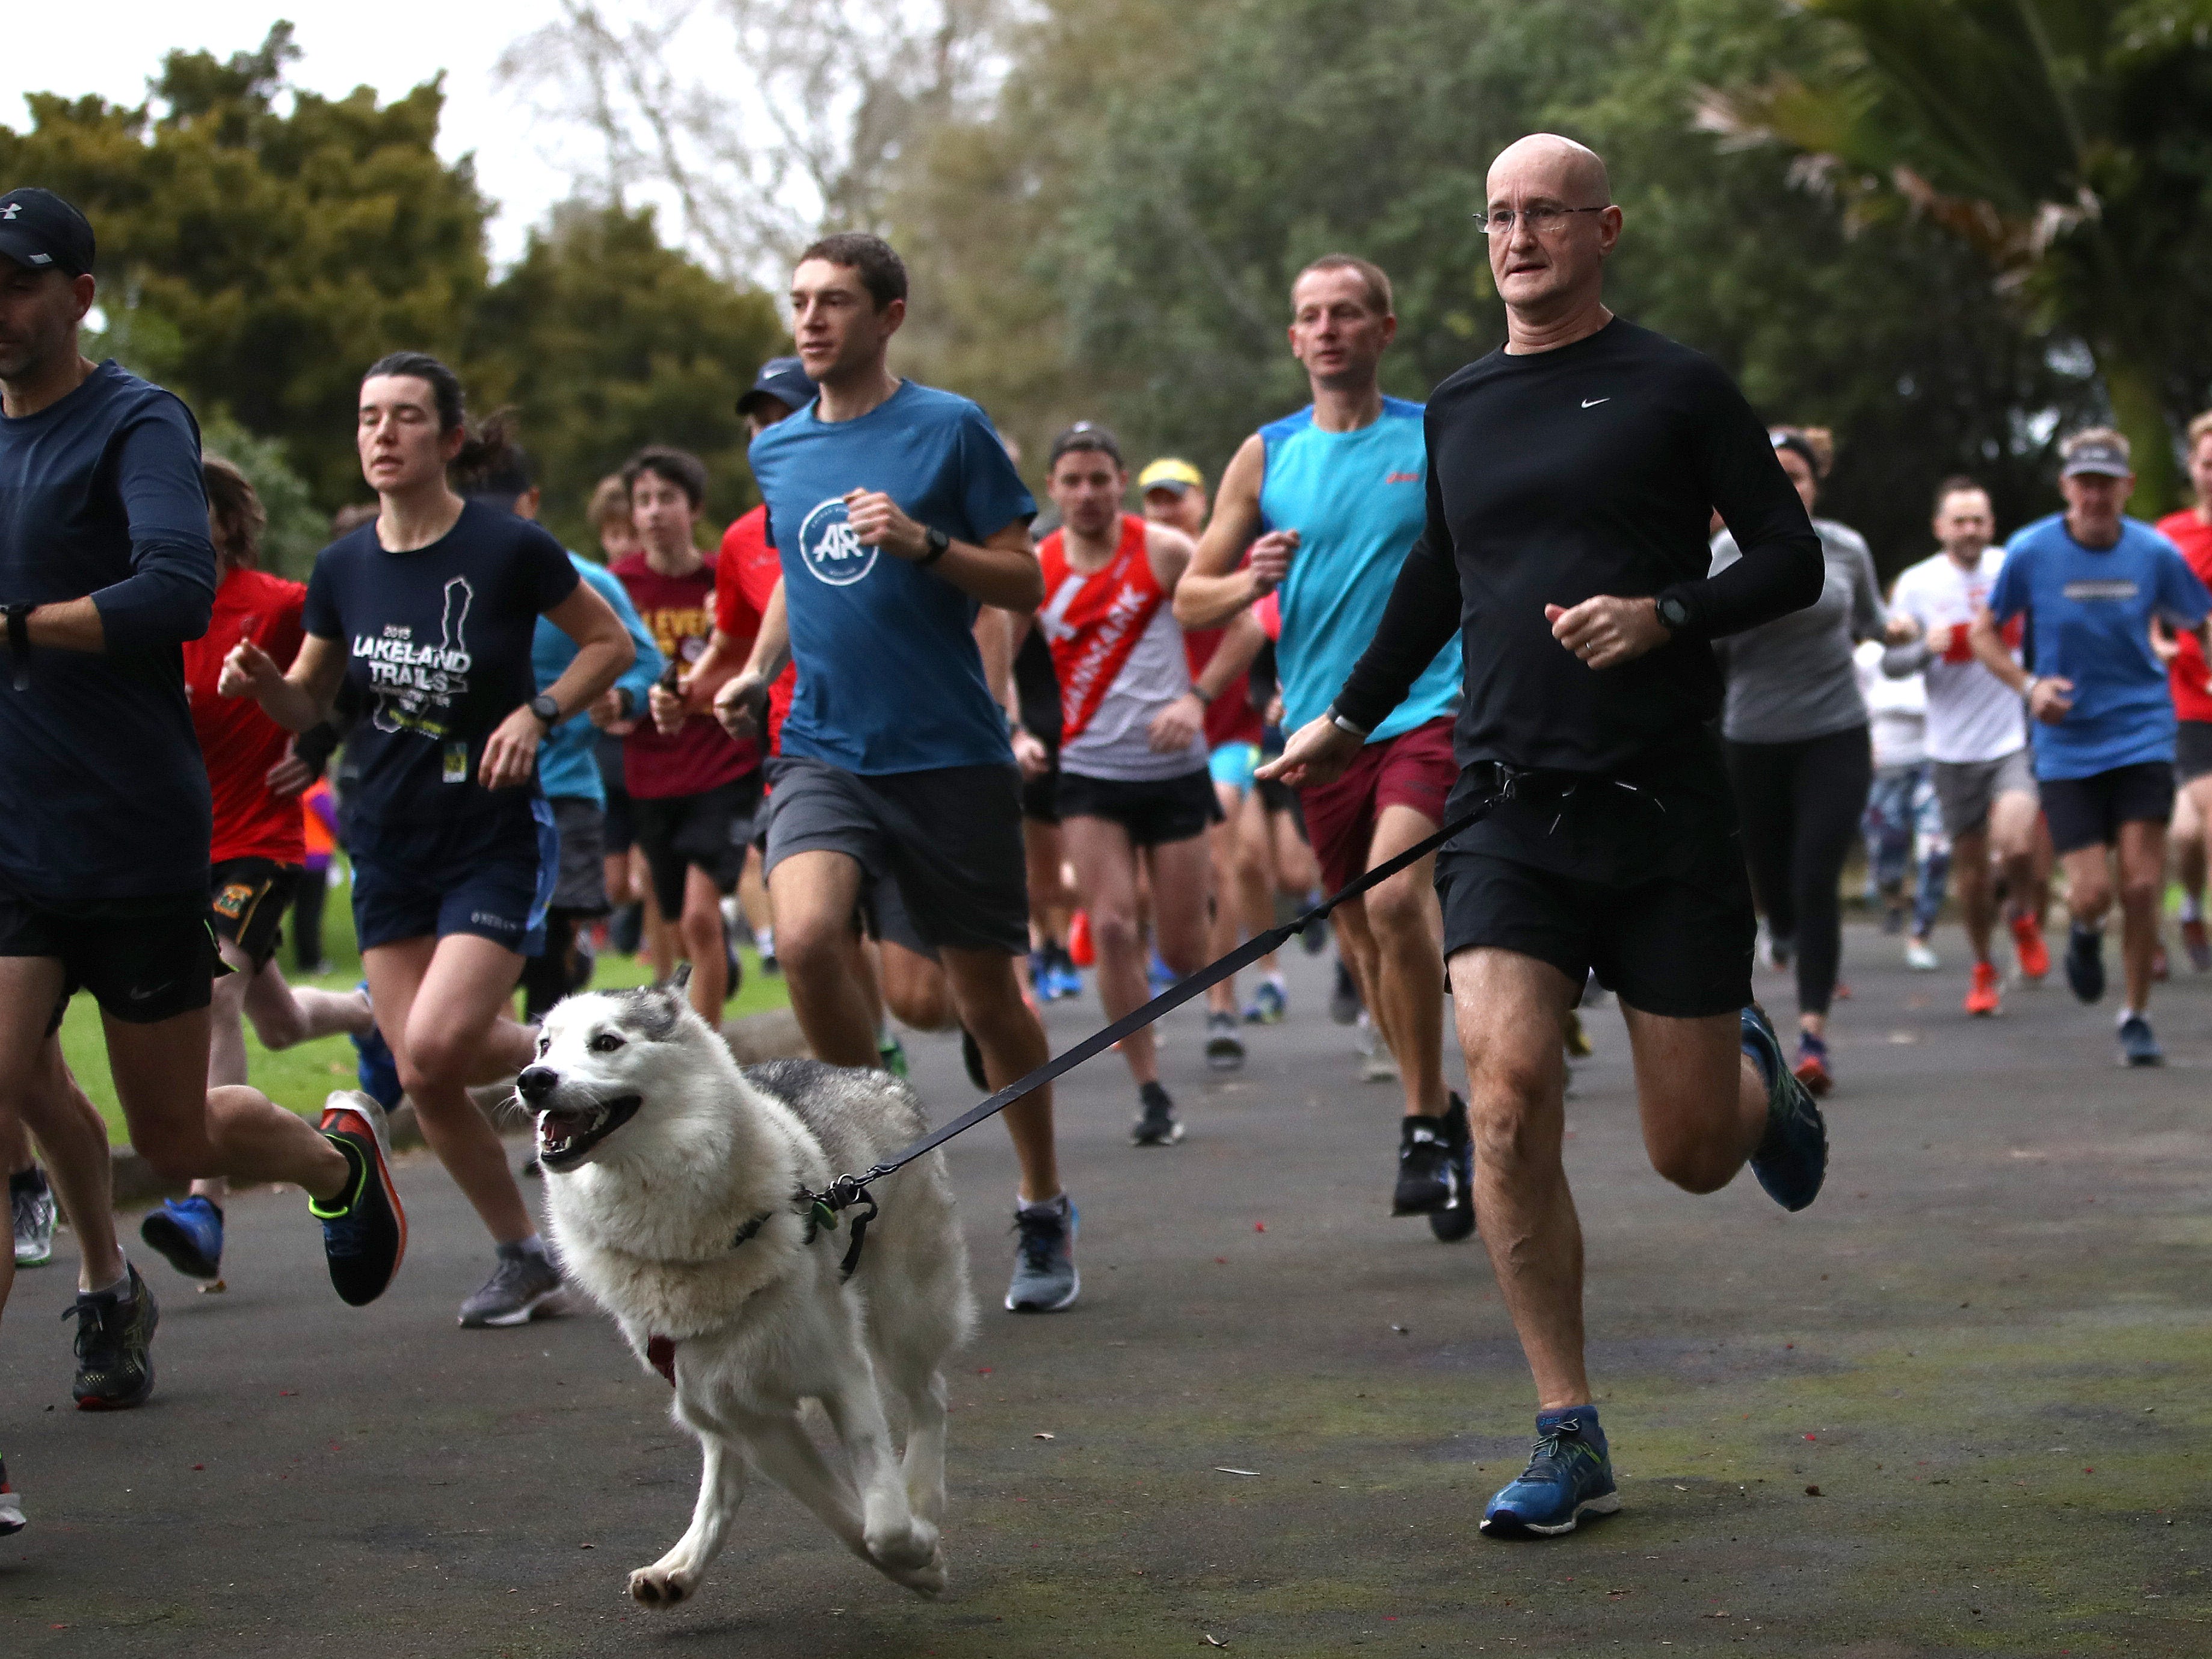 A man runs with a dog on a waist harness at a Parkrun in New Zealand